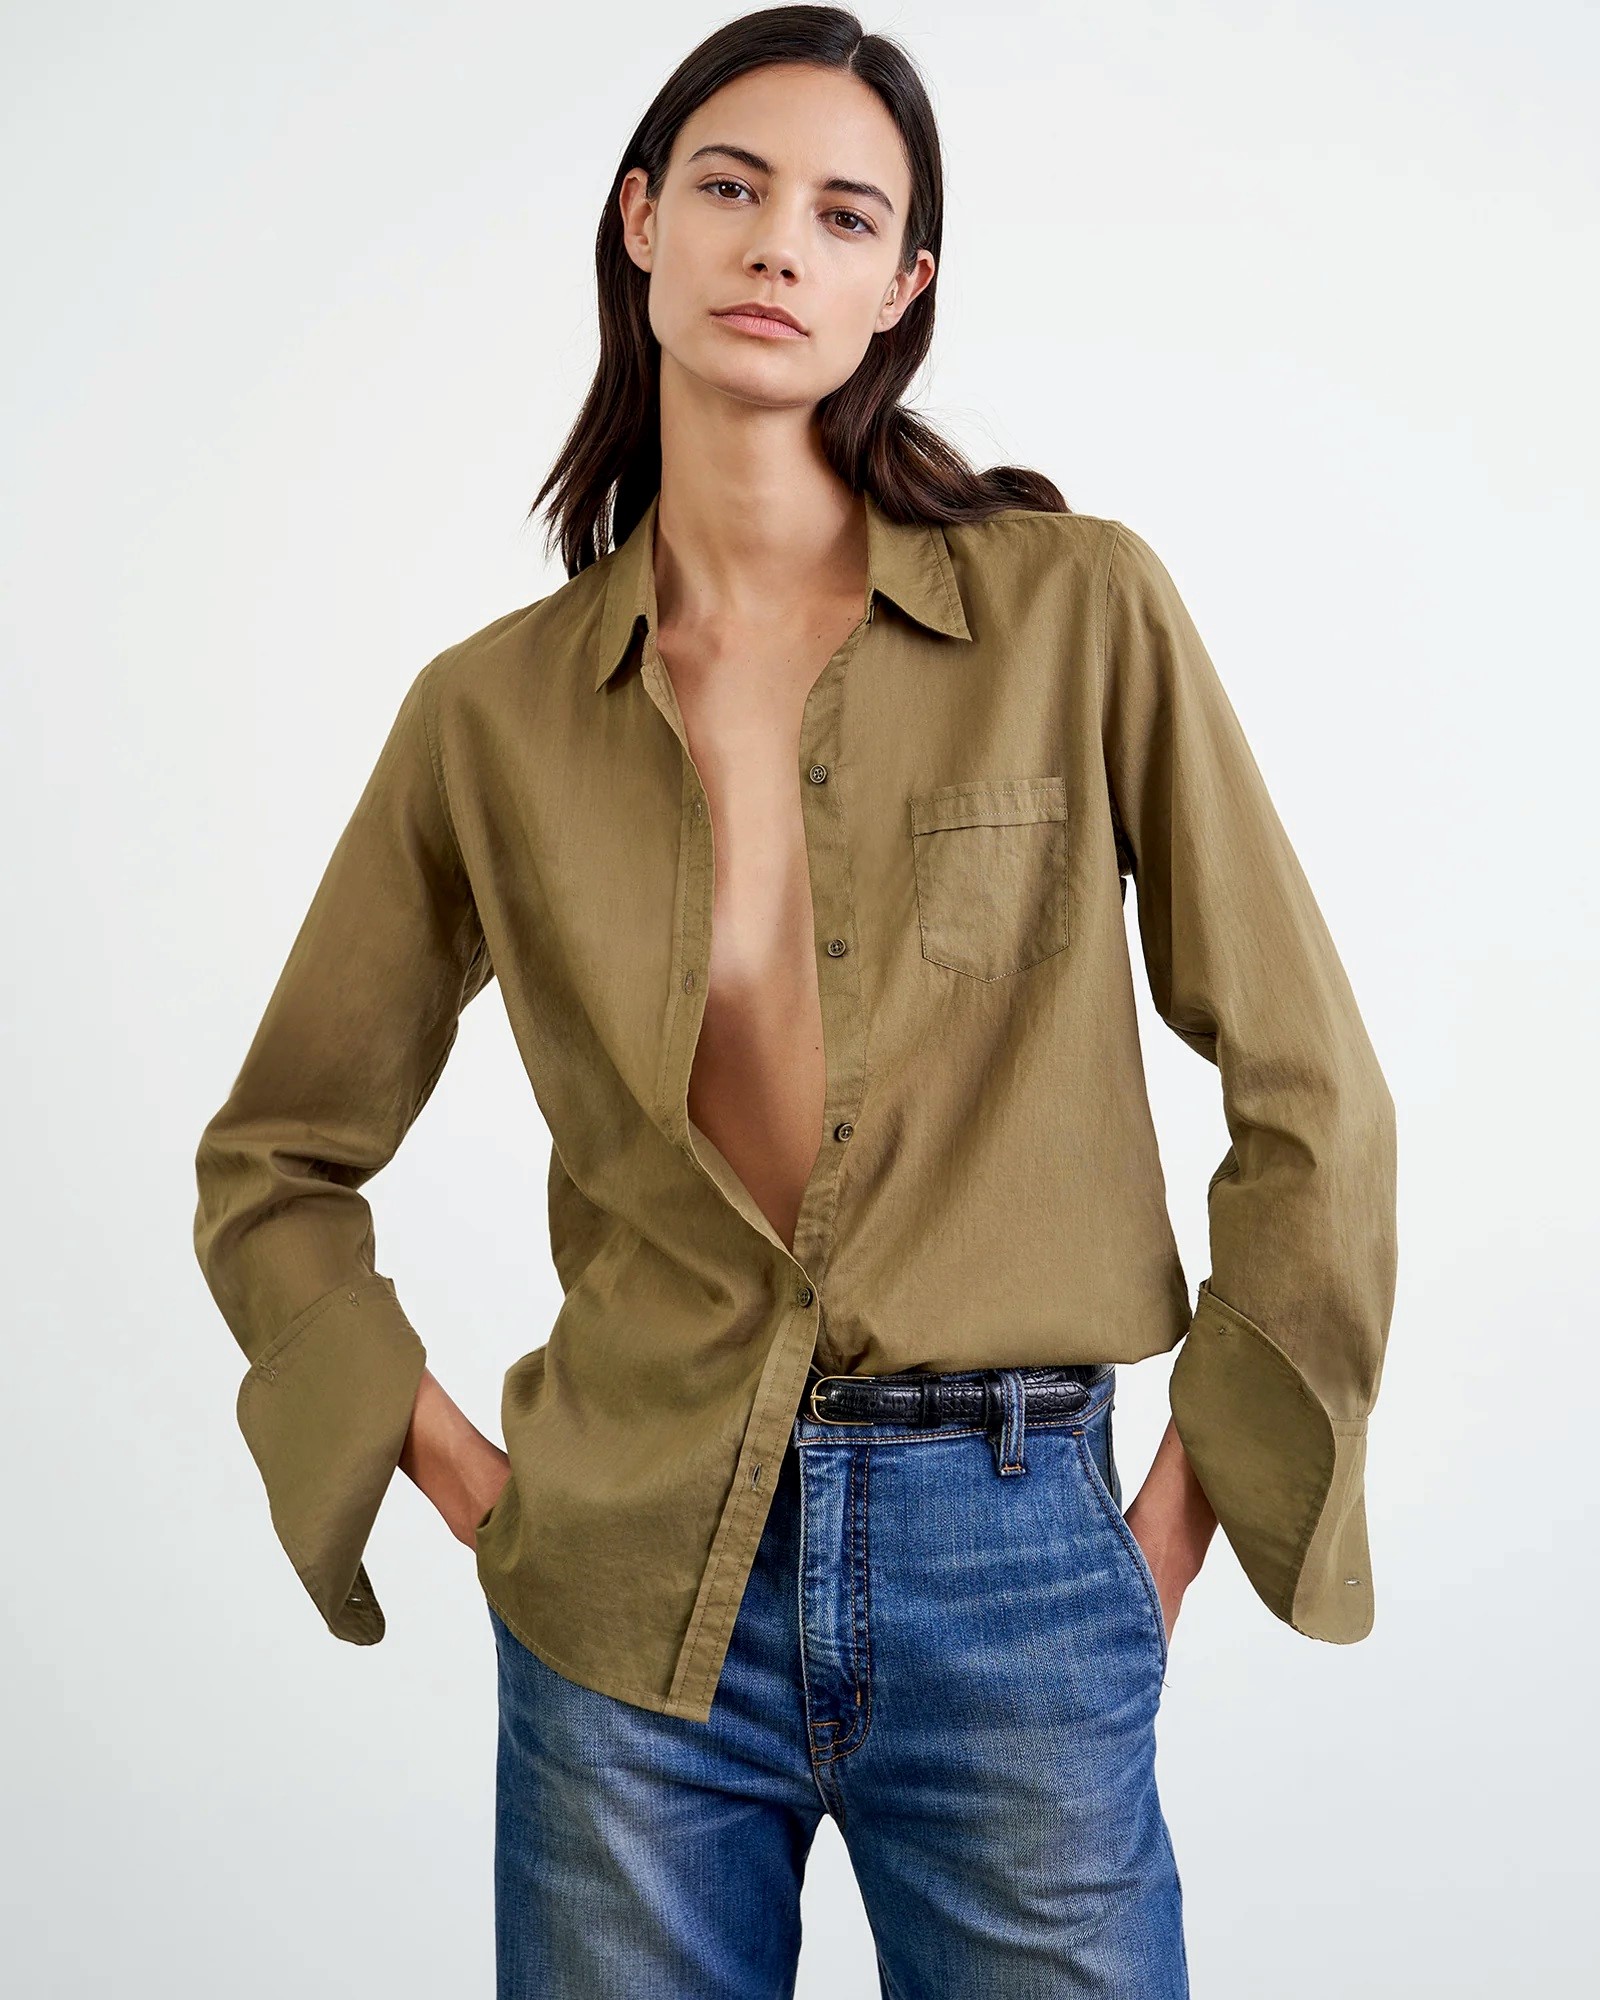 NILI LOTAN Cotton Voile NL Shirt in Olive Green L